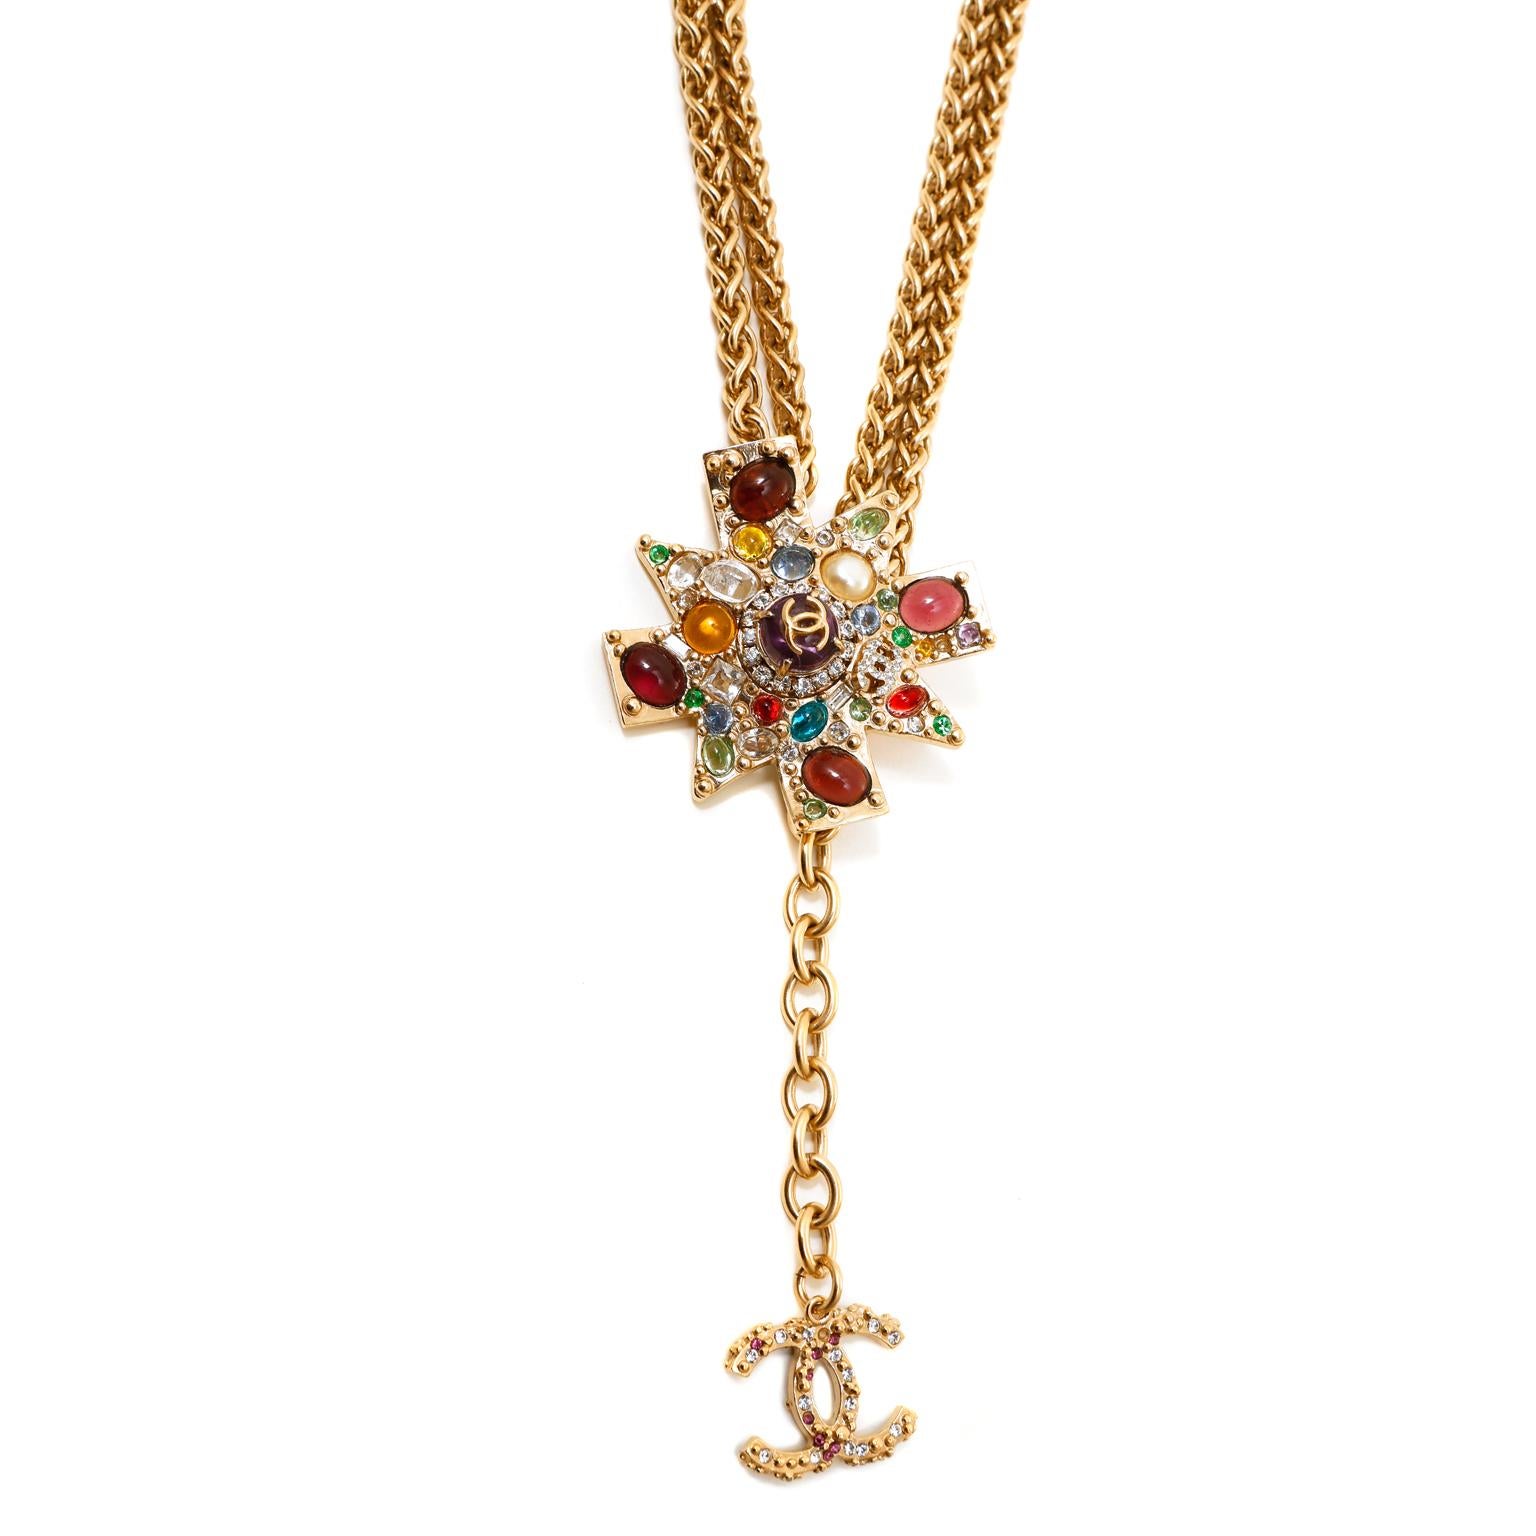 This authentic Chanel Byzantine Gripoix Star Necklace is in excellent vintage condition.  Irregularly shaped 14 karat gold plated star is covered in multicolored Gripoix glass jewels. Dramatically dangling from a double gold linked chain with an